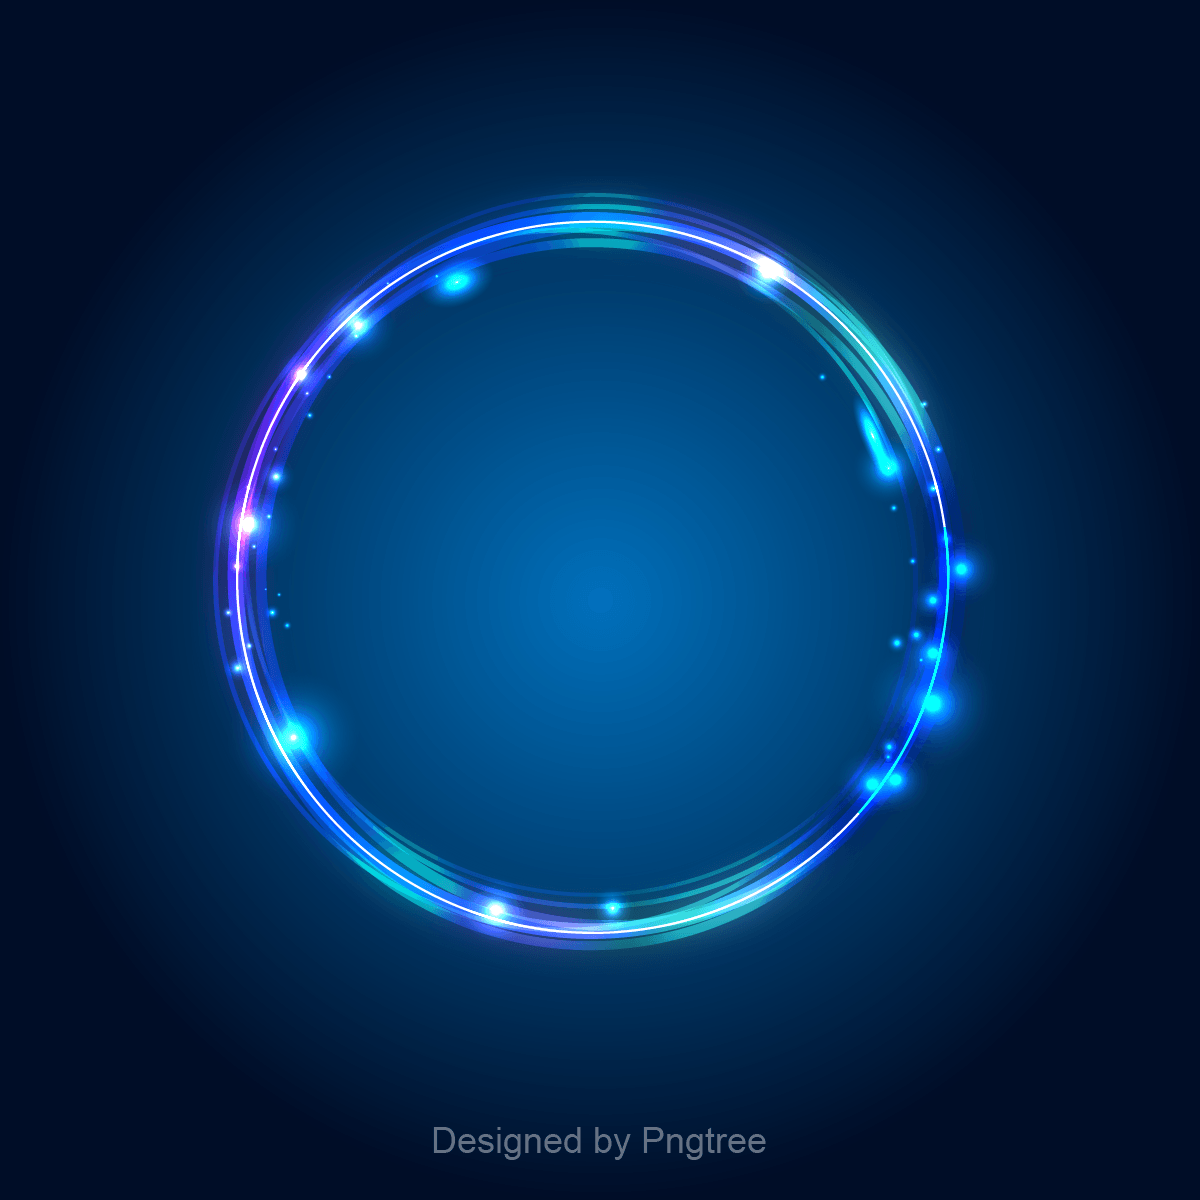 In an Orange a Blue Circle Logo - Circle PNG Images, Download 35,802 PNG Resources with Transparent ...